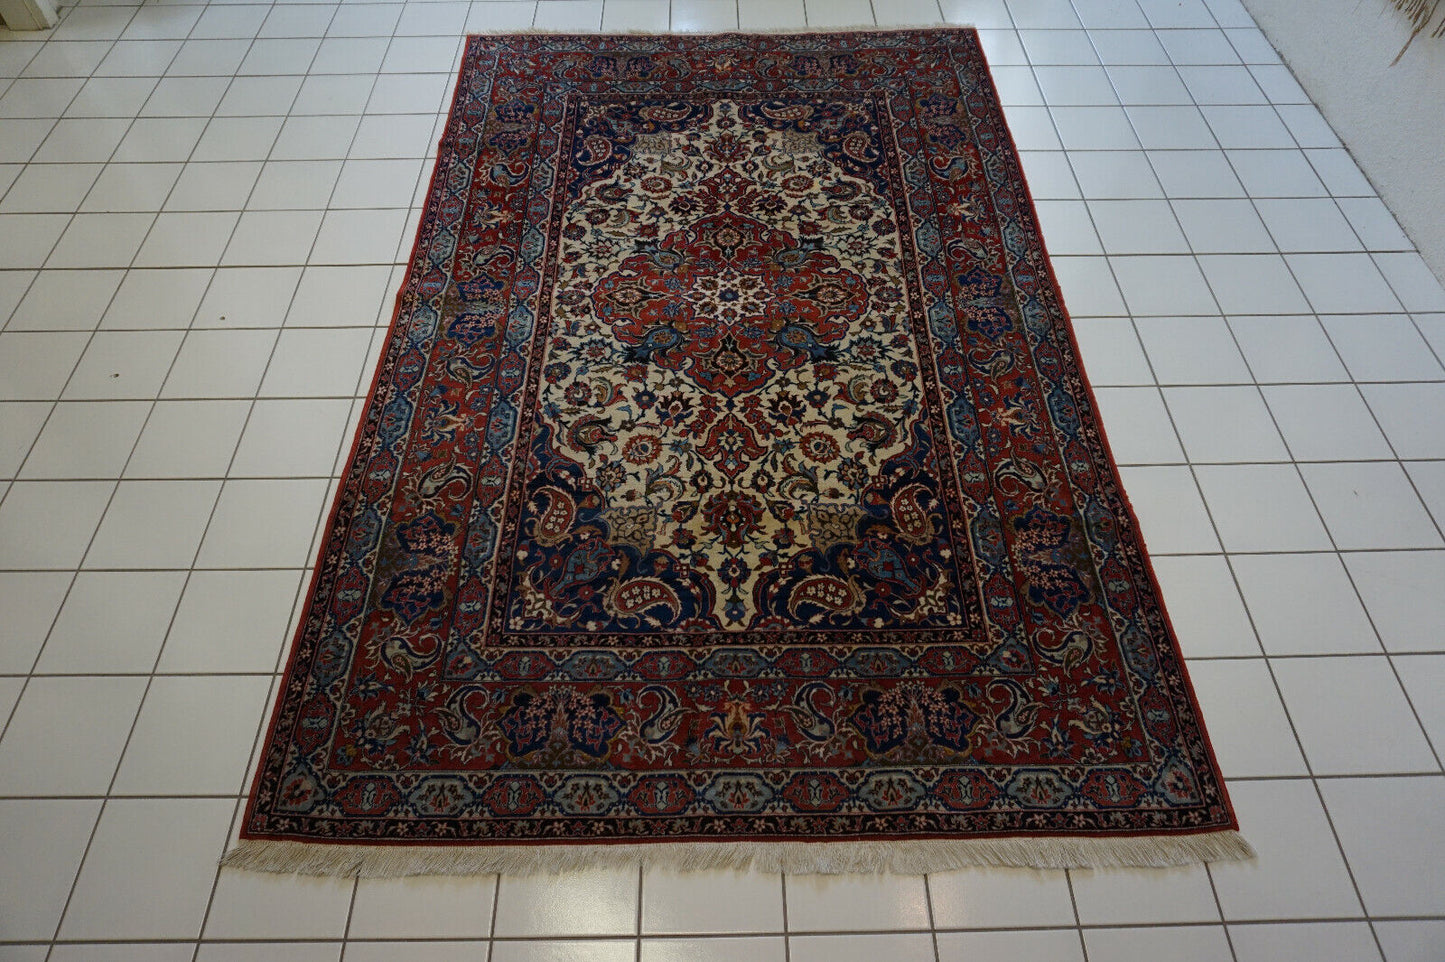 Side angle shot of the Handmade Antique Persian Style Isfahan Rug showcasing size and scale